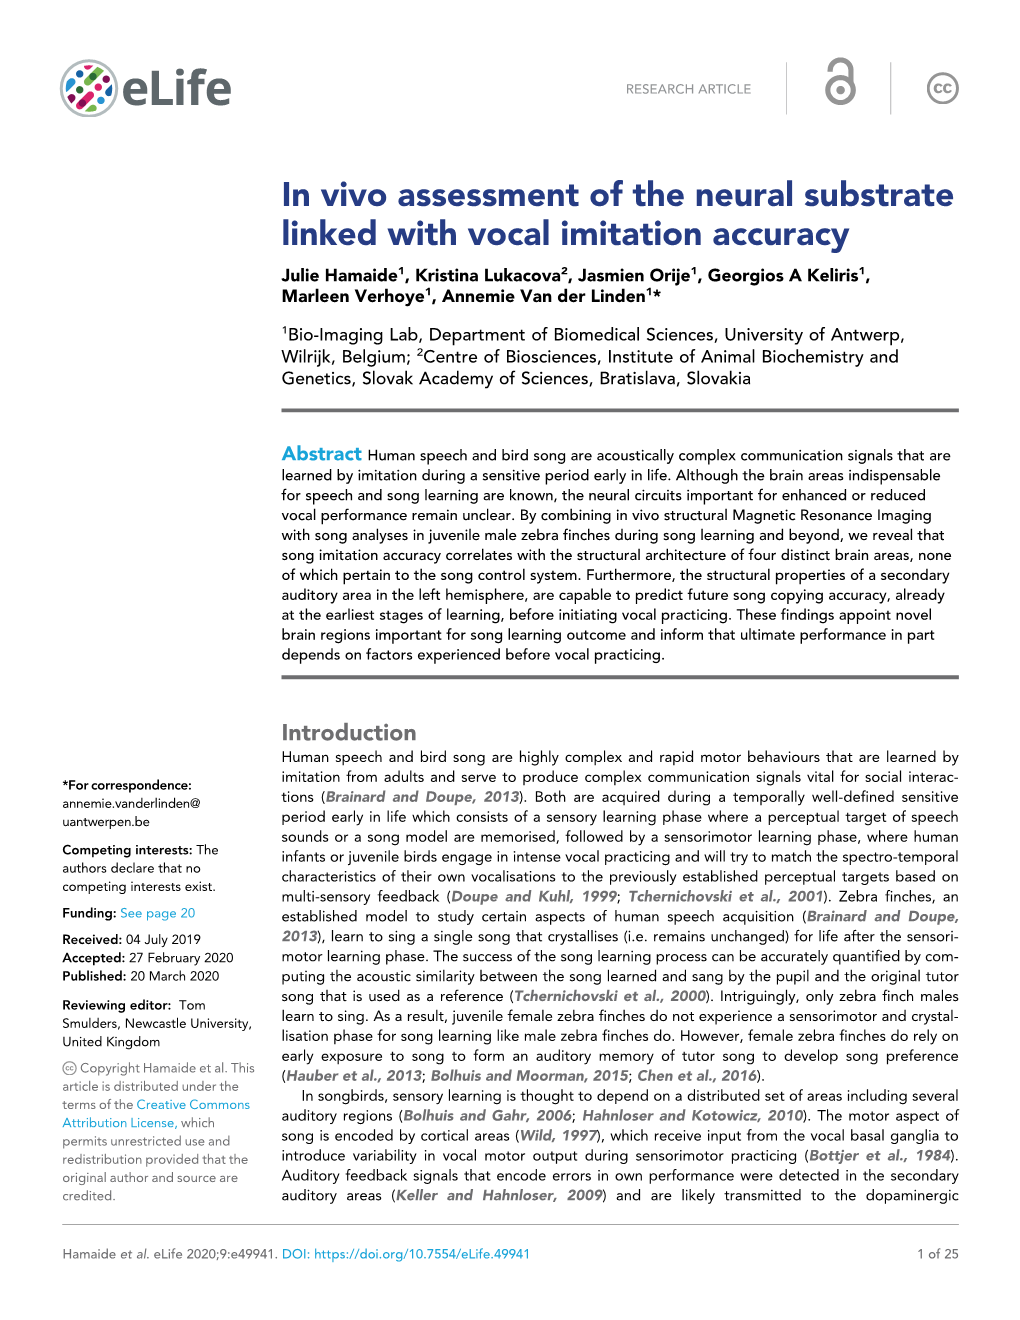 In Vivo Assessment of the Neural Substrate Linked with Vocal Imitation